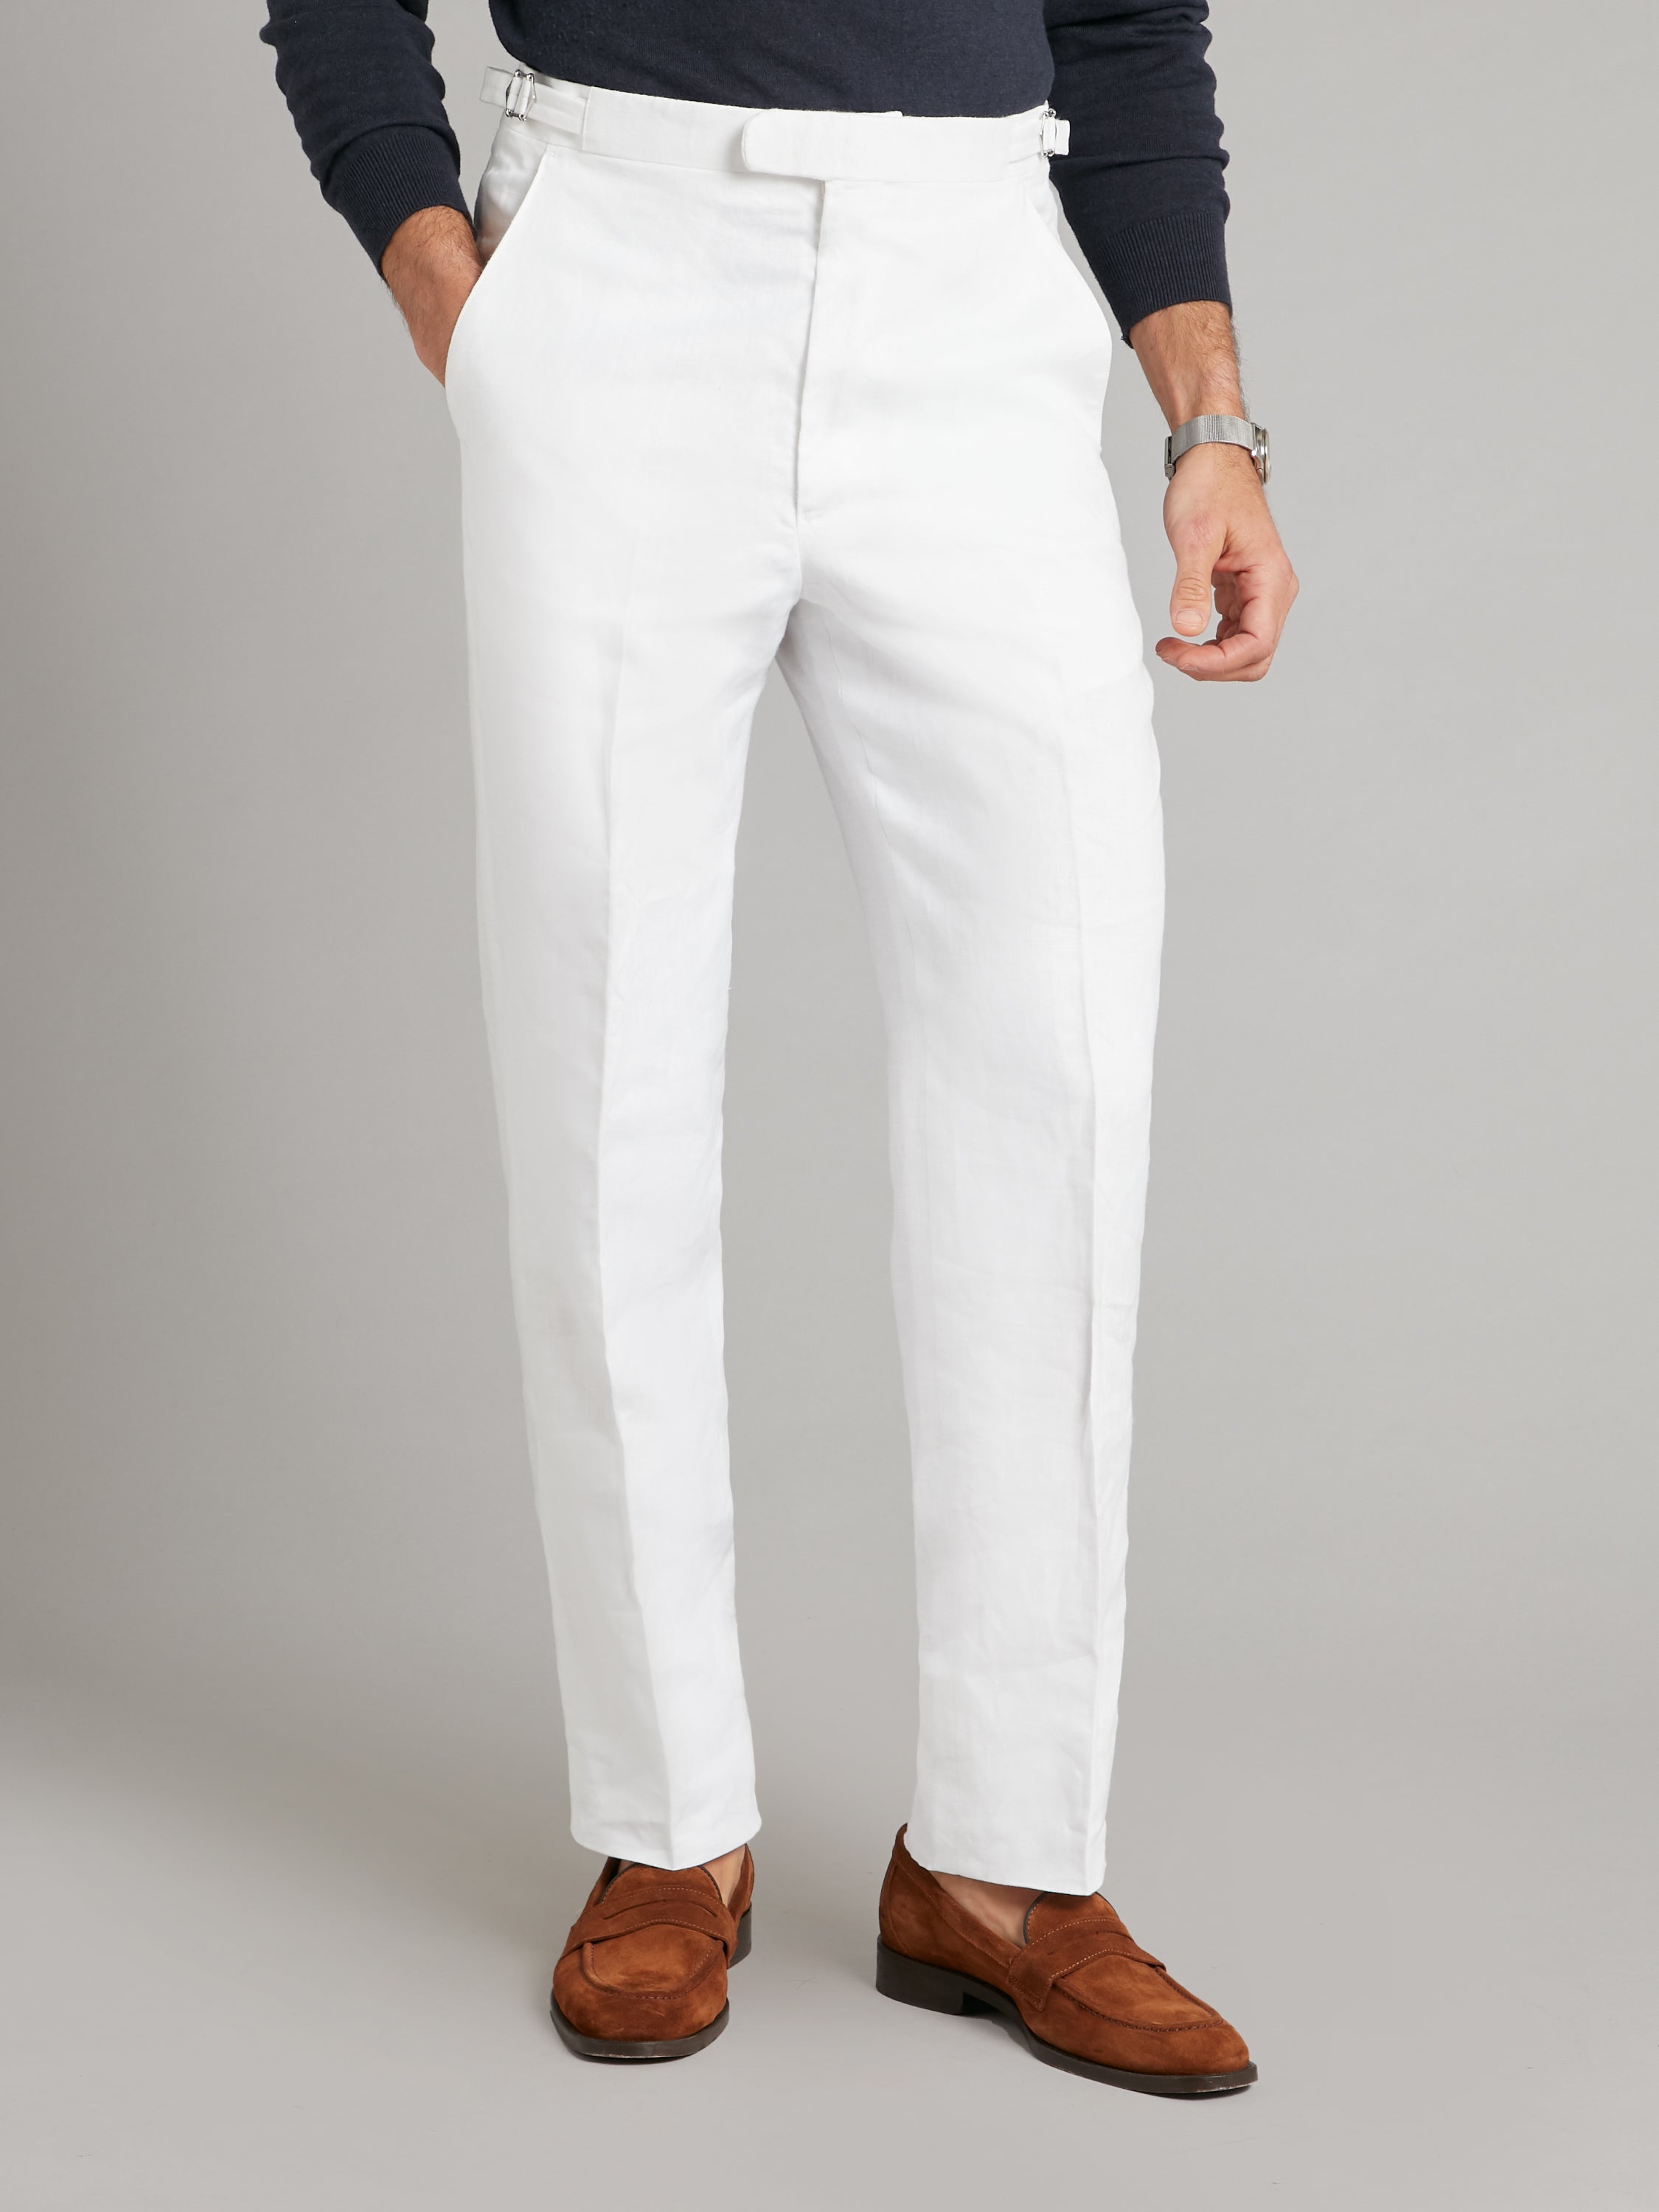 Cotton Formal Mens Flat Front Trousers